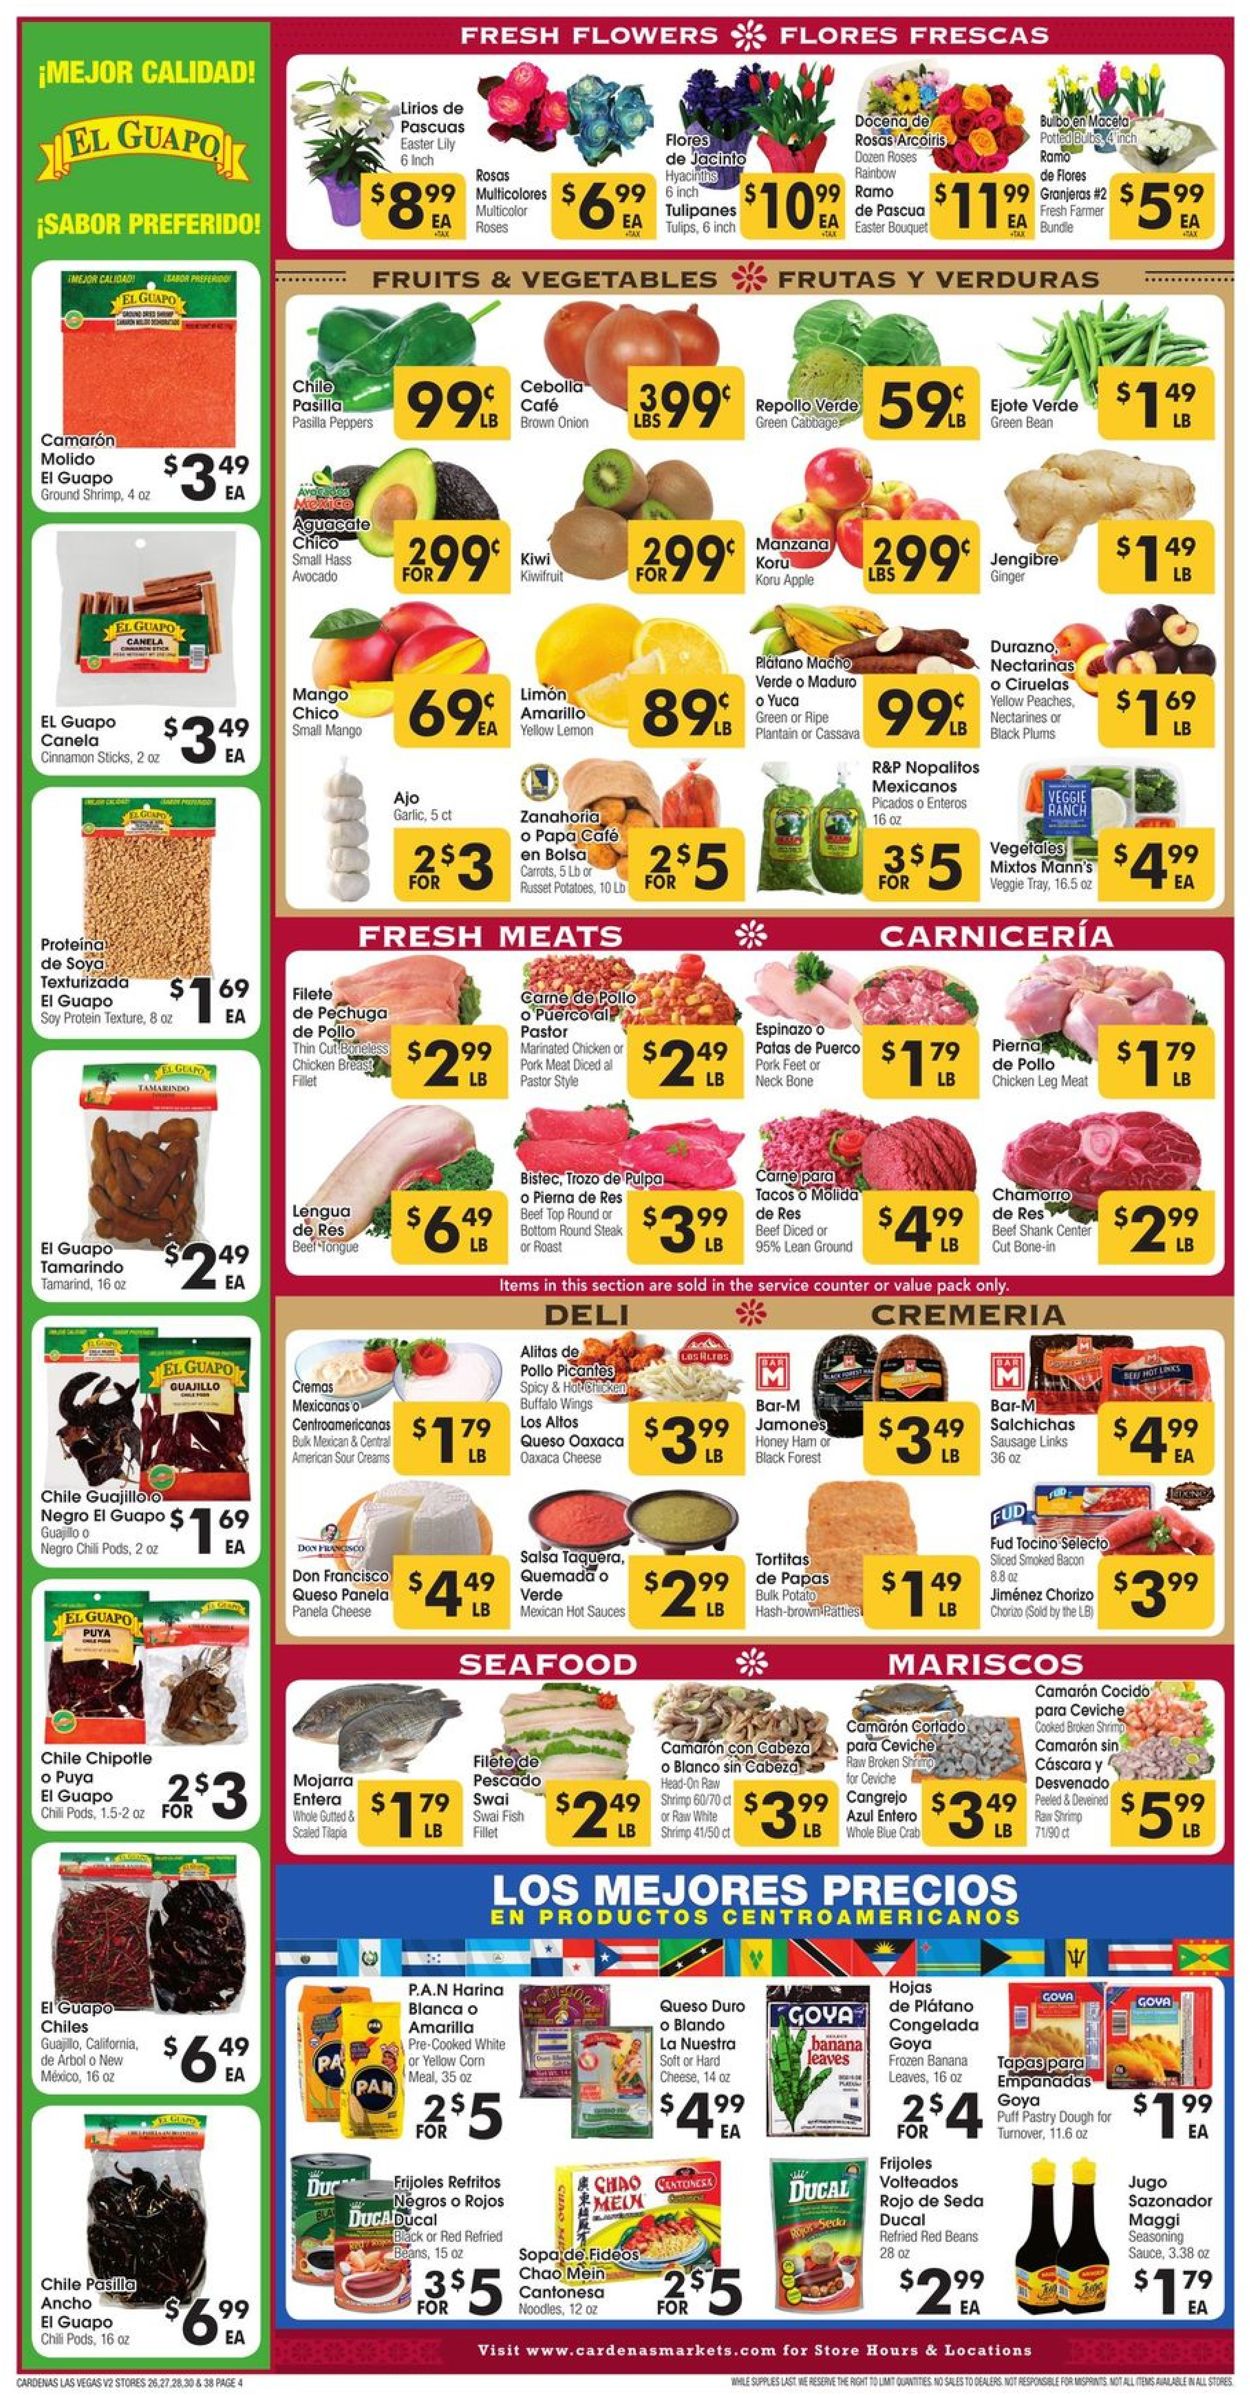 Catalogue Cardenas Easter 2021 ad from 03/31/2021